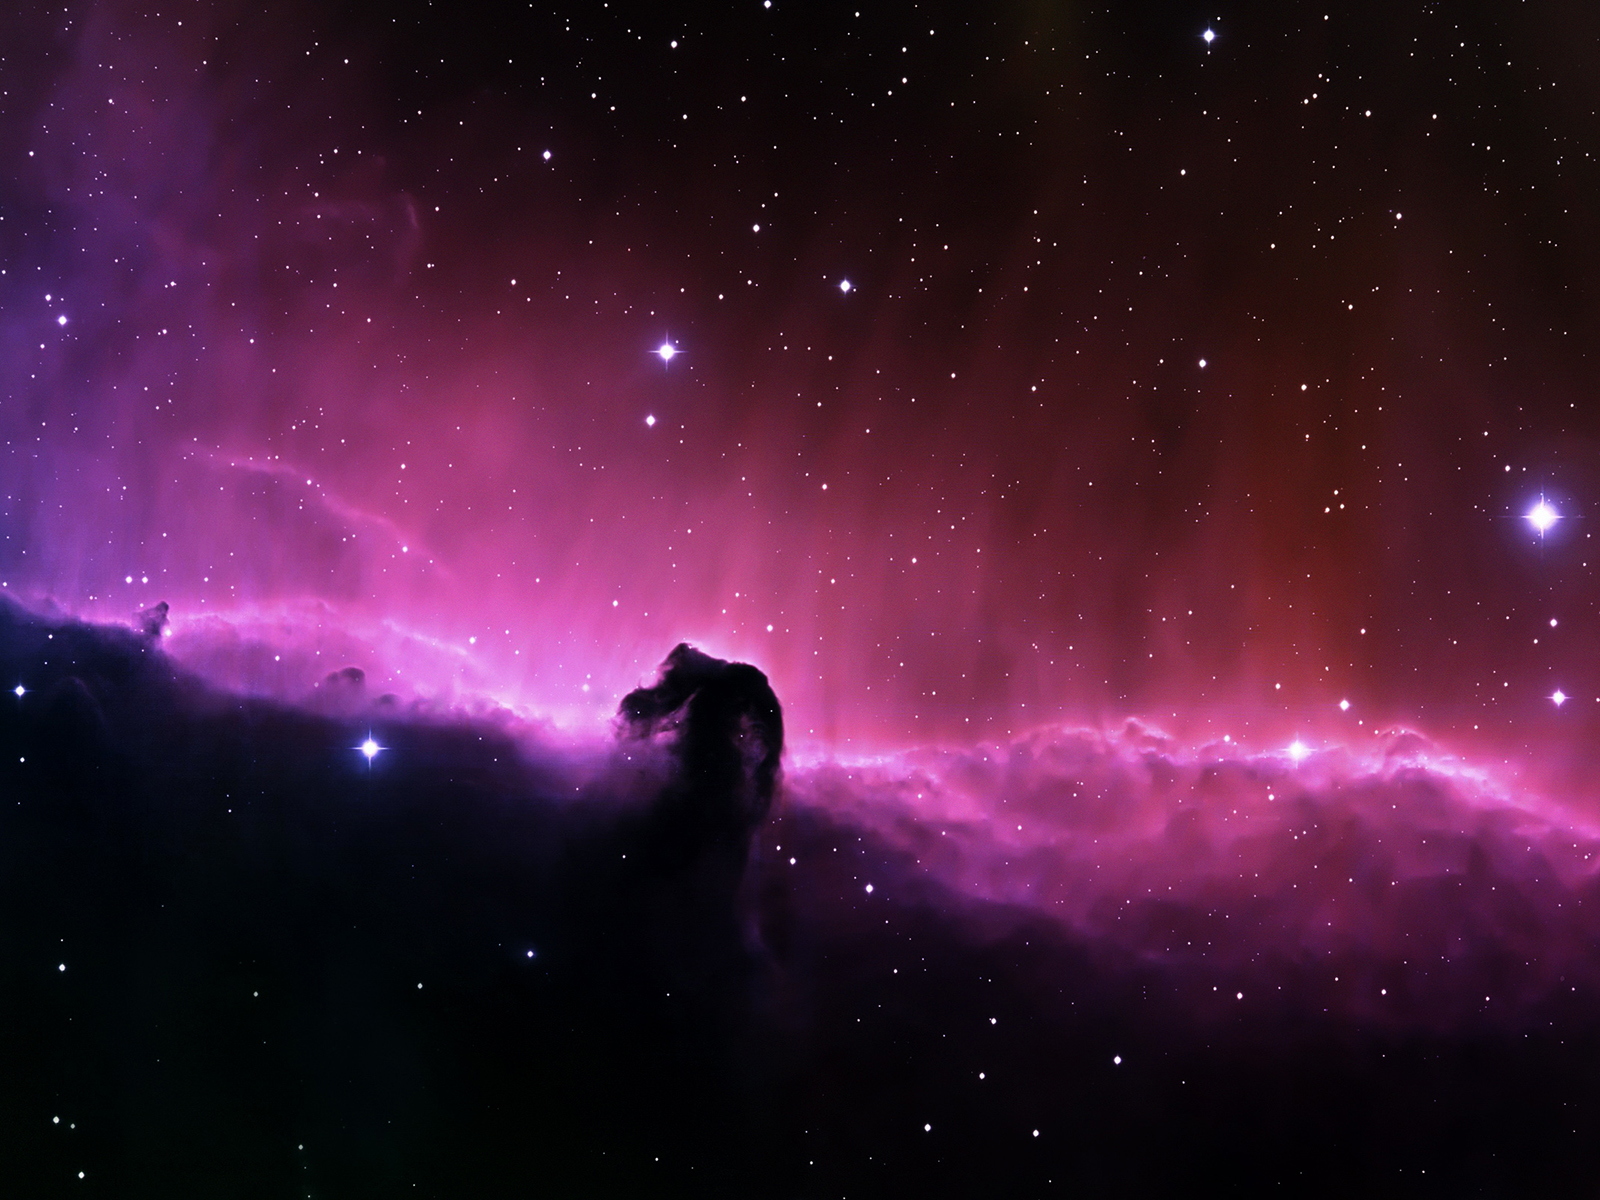 Horse Nebula Wallpaper And Image Pictures Photos